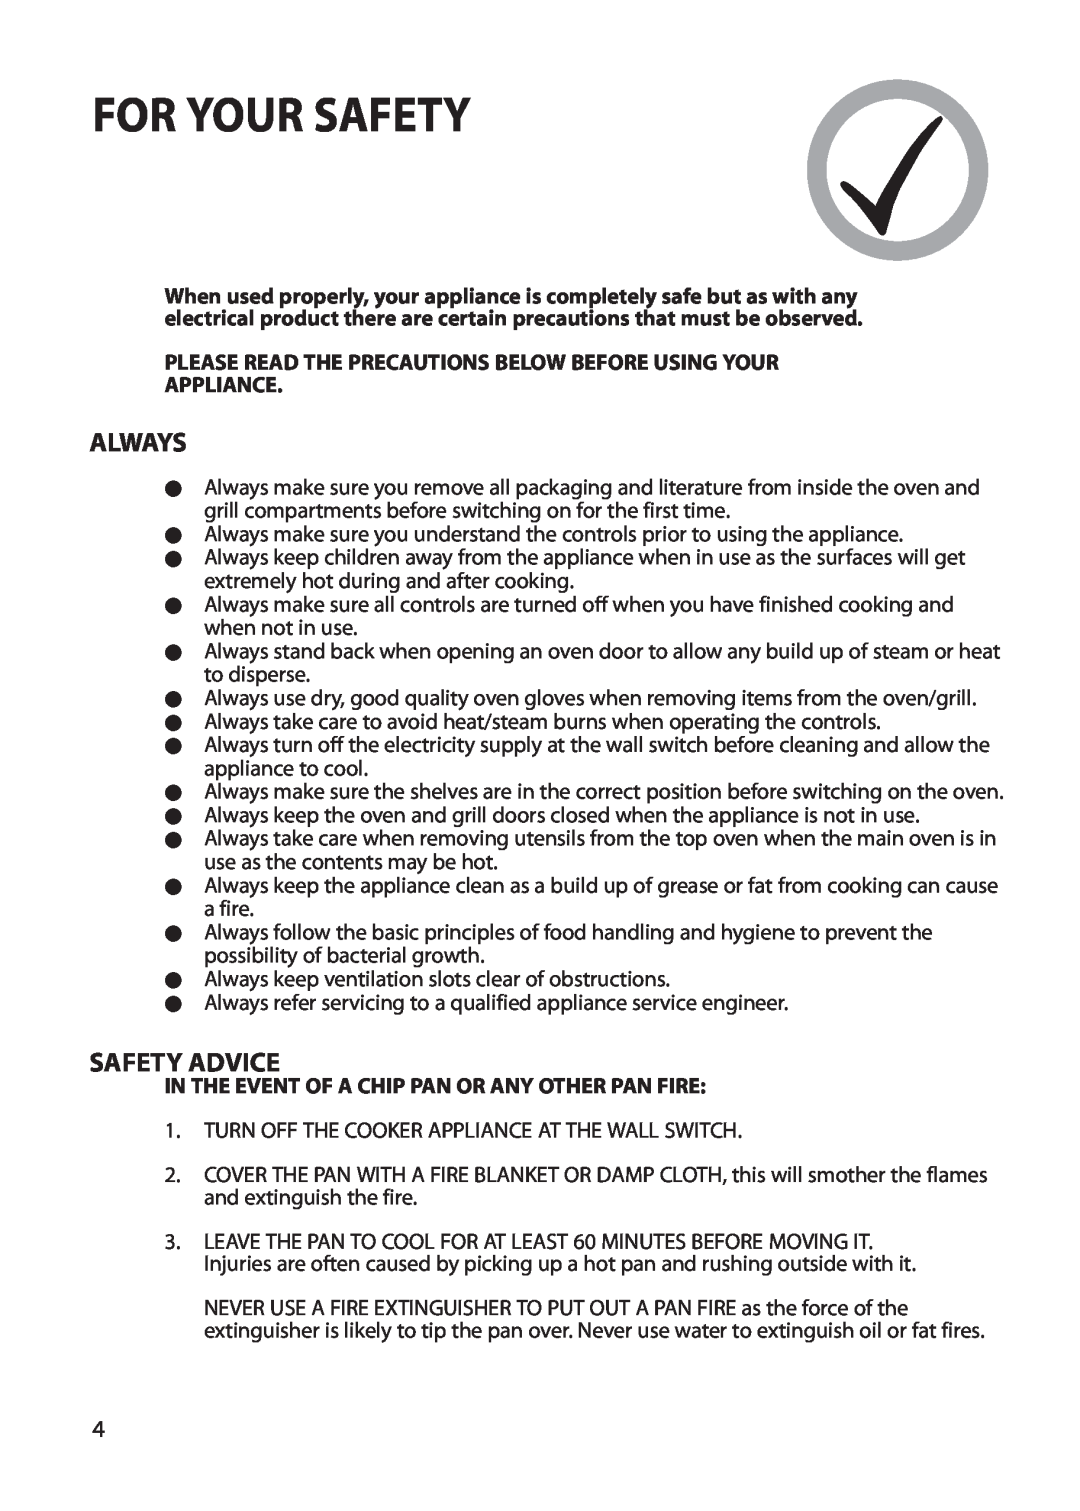 Hotpoint BU62 BU65 For Your Safety, Always, Safety Advice, Please Read The Precautions Below Before Using Your Appliance 